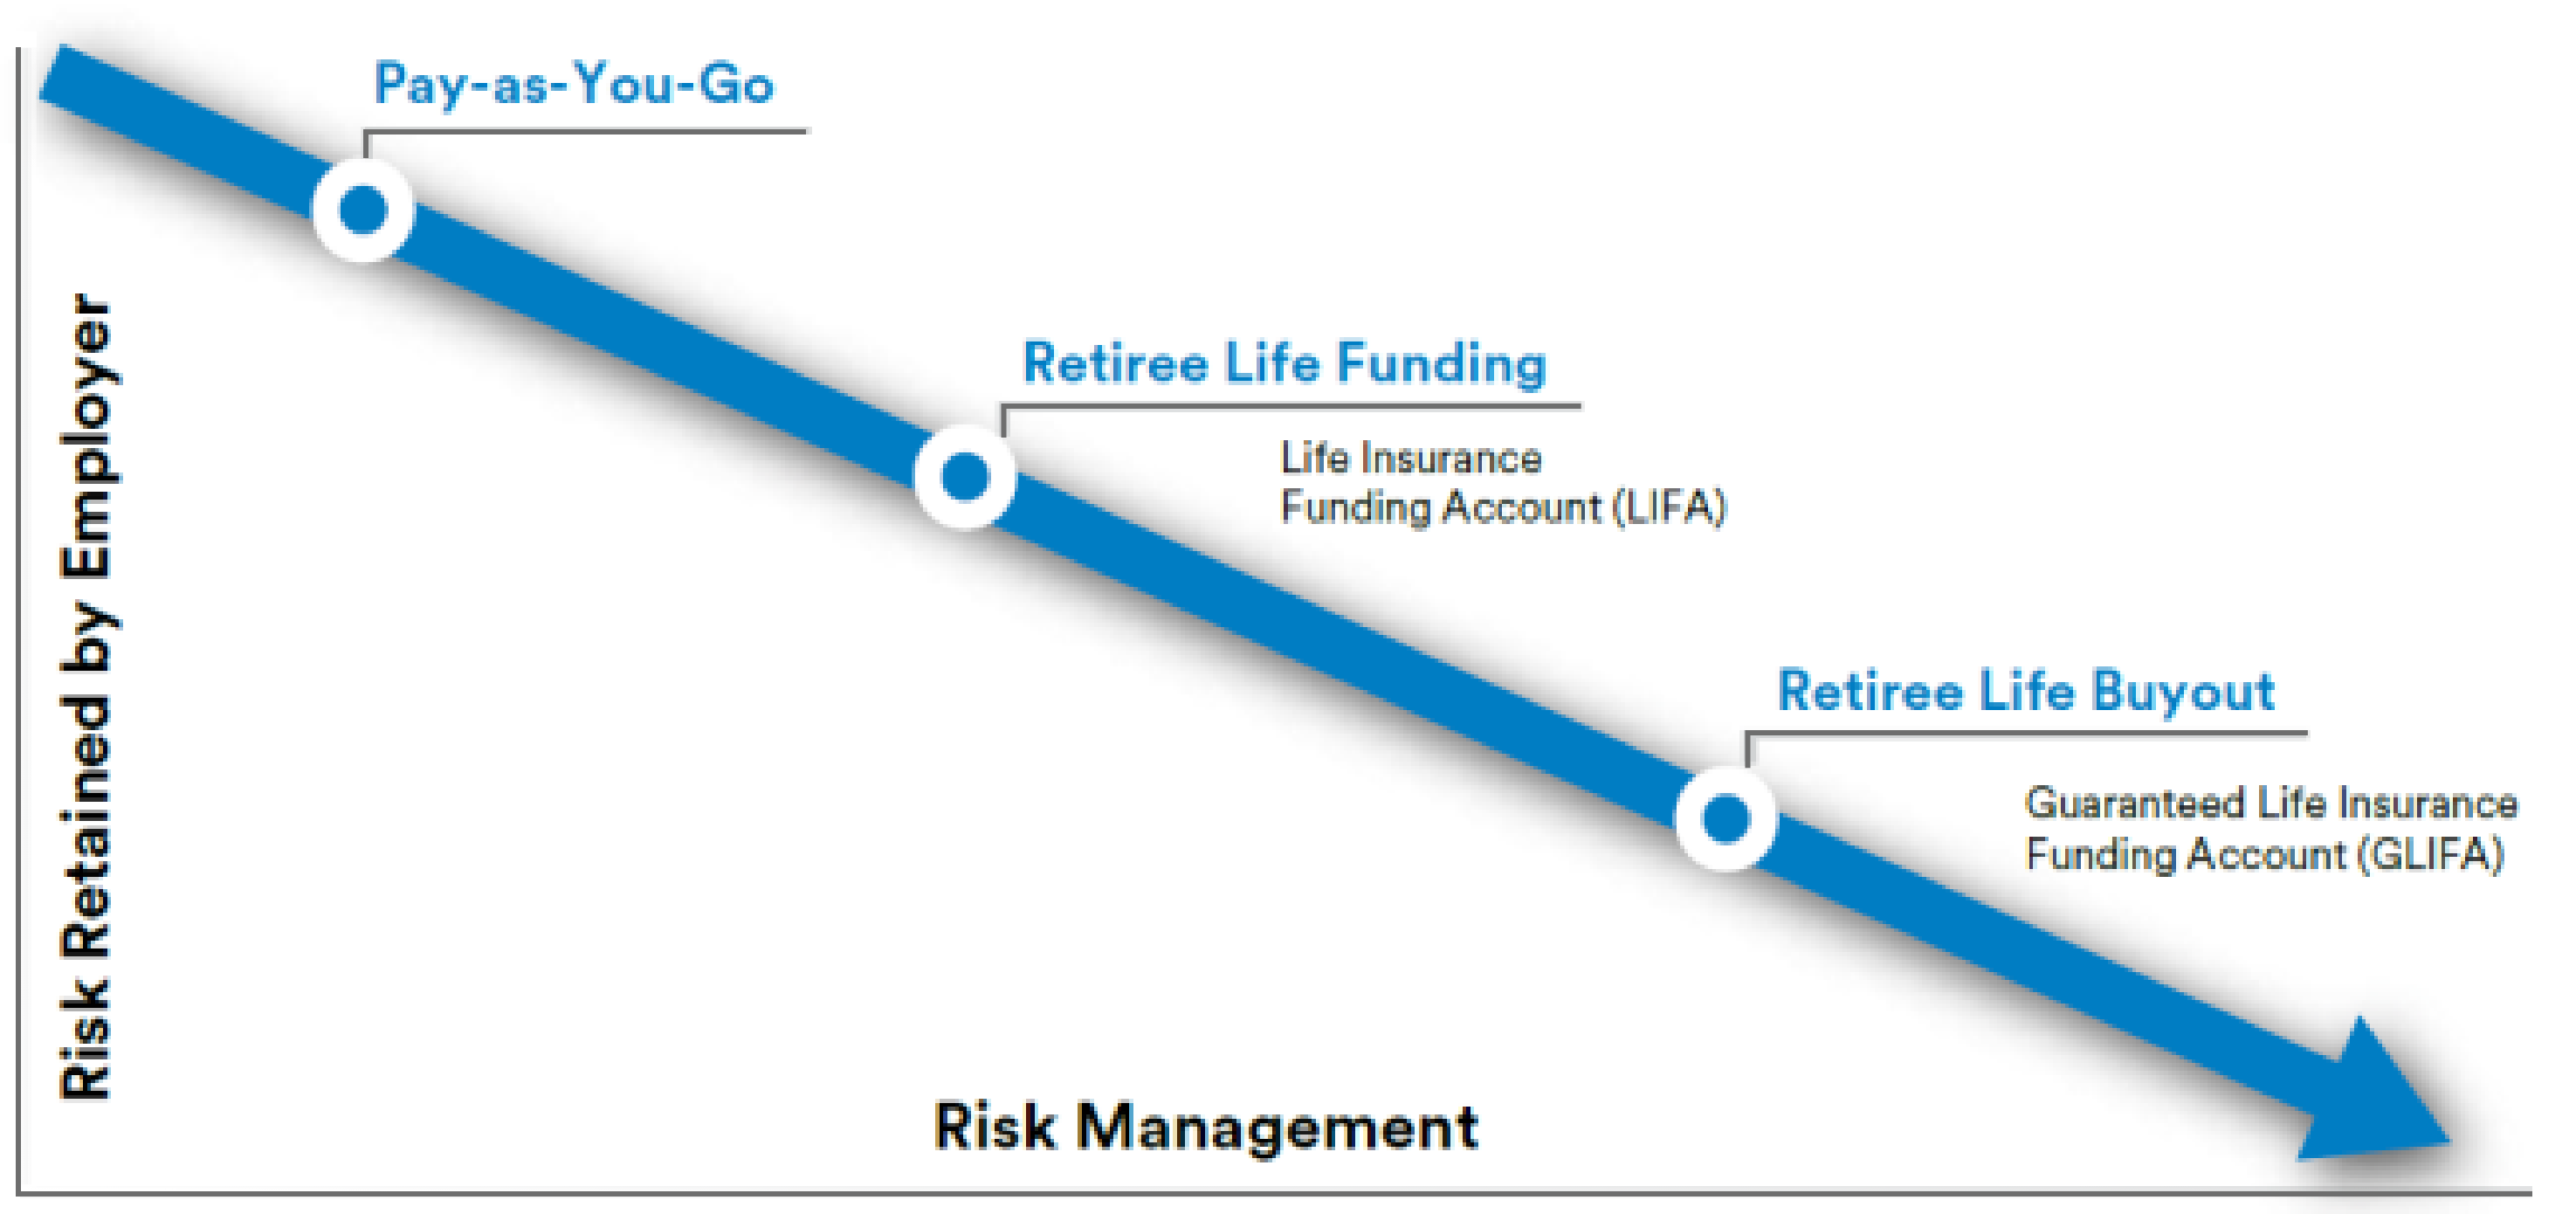 Retiree Life Funding Solutions lower your long term "out-of-pocket" premium